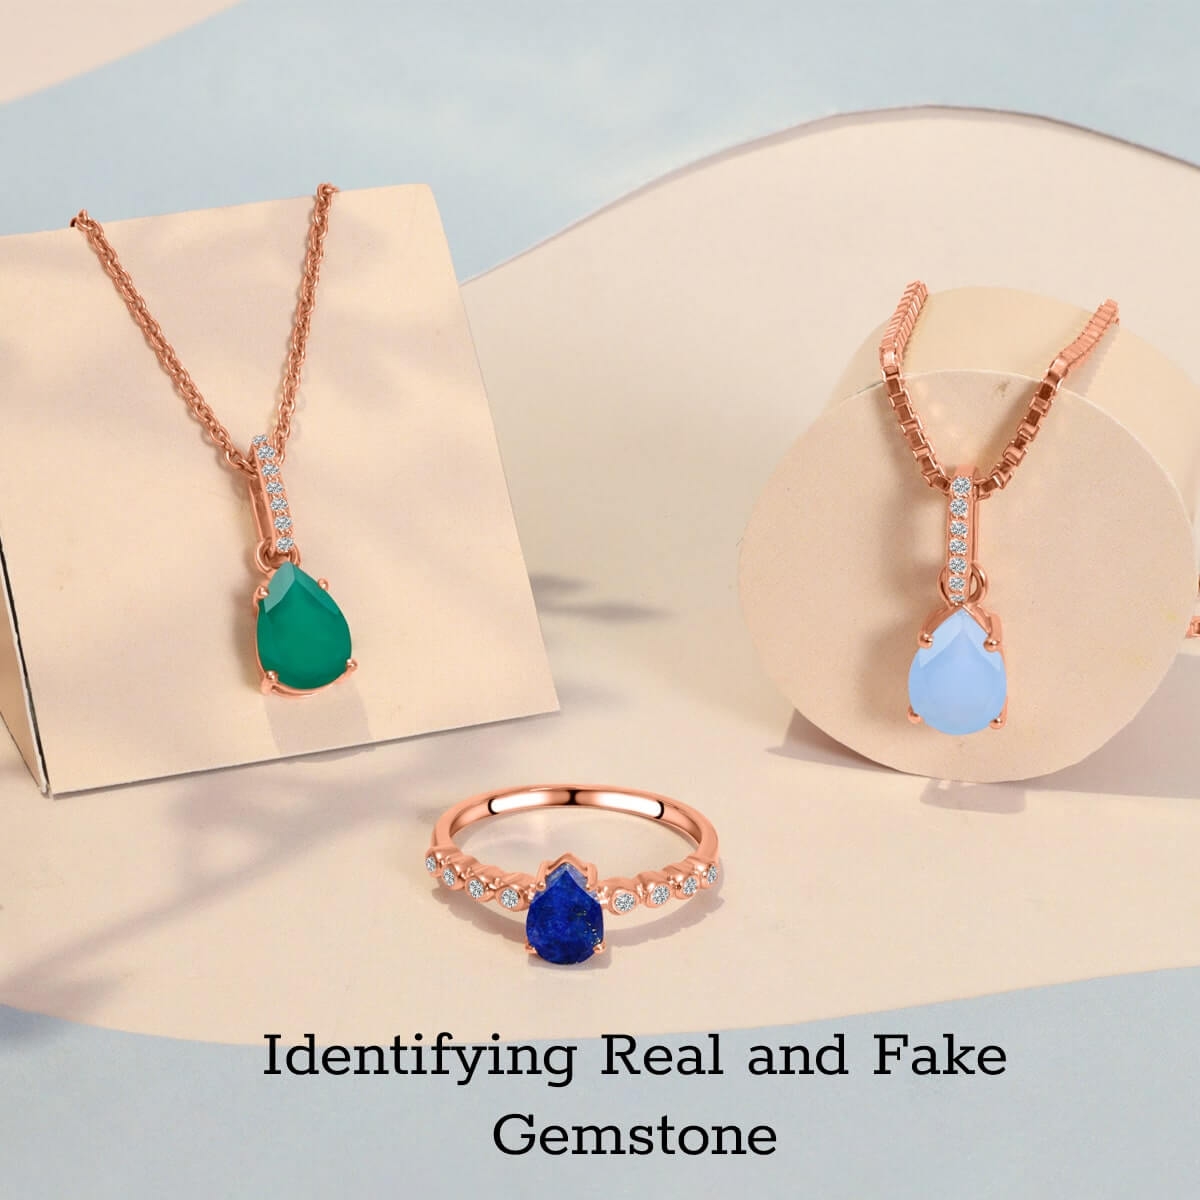 How to Identify if the Gemstone is Real or Fake?